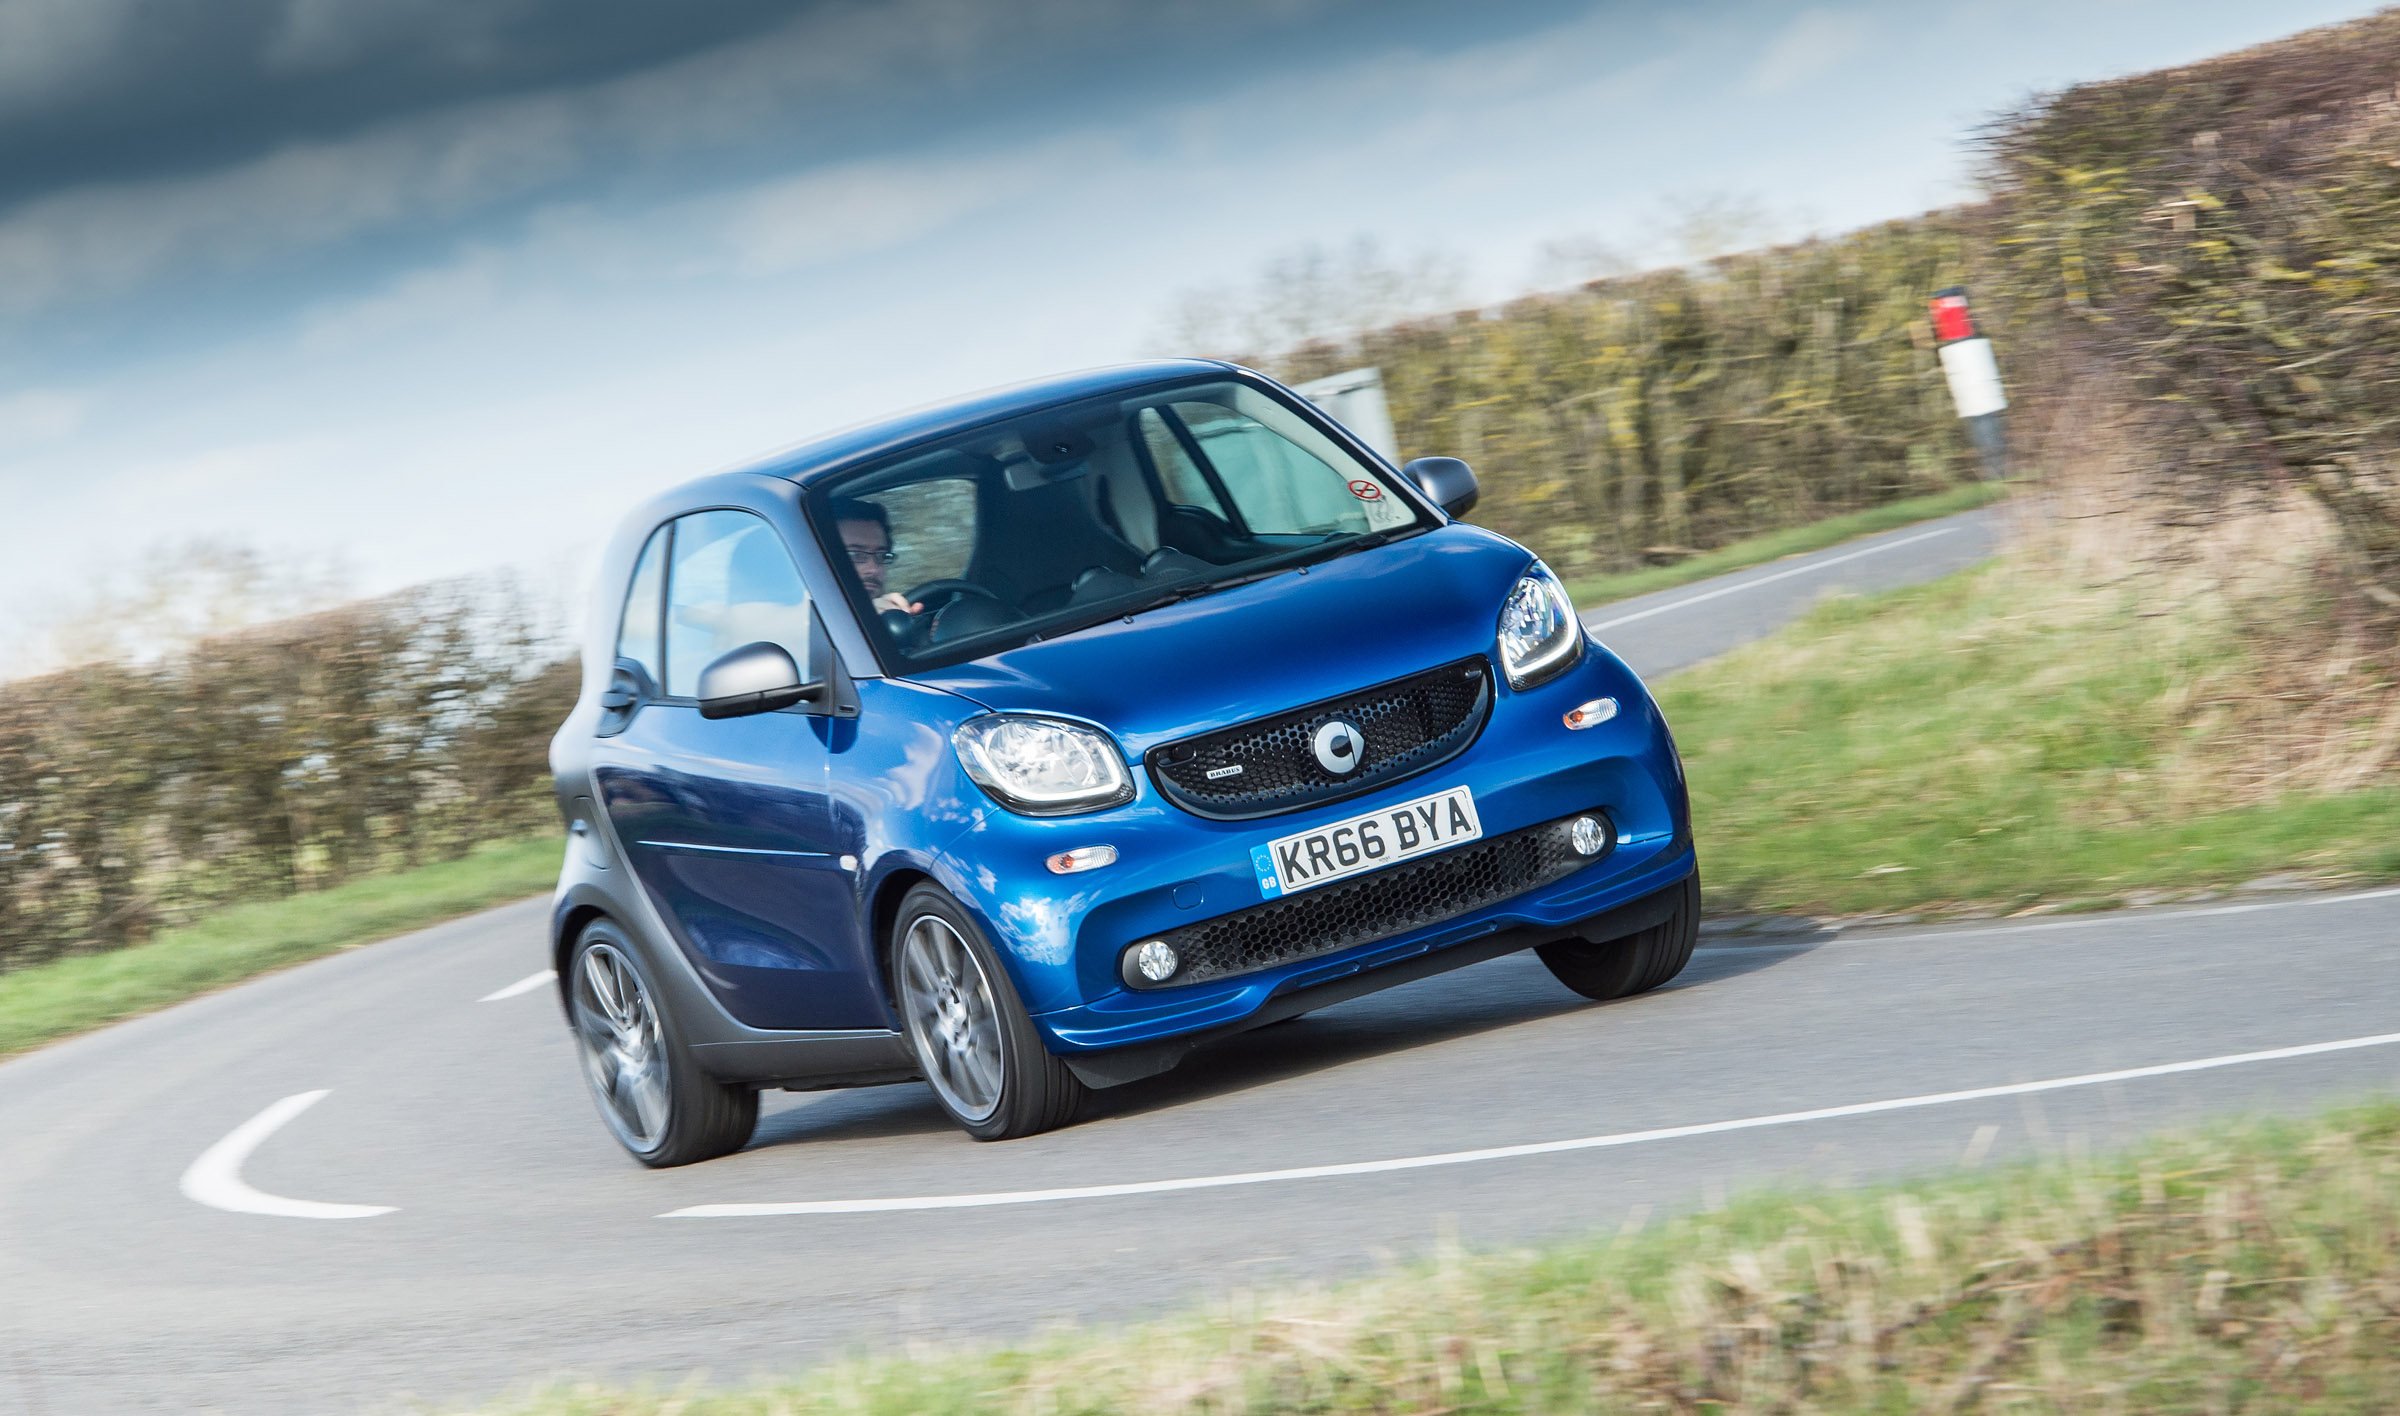 2016 Smart fortwo, Specifications - Car Specs